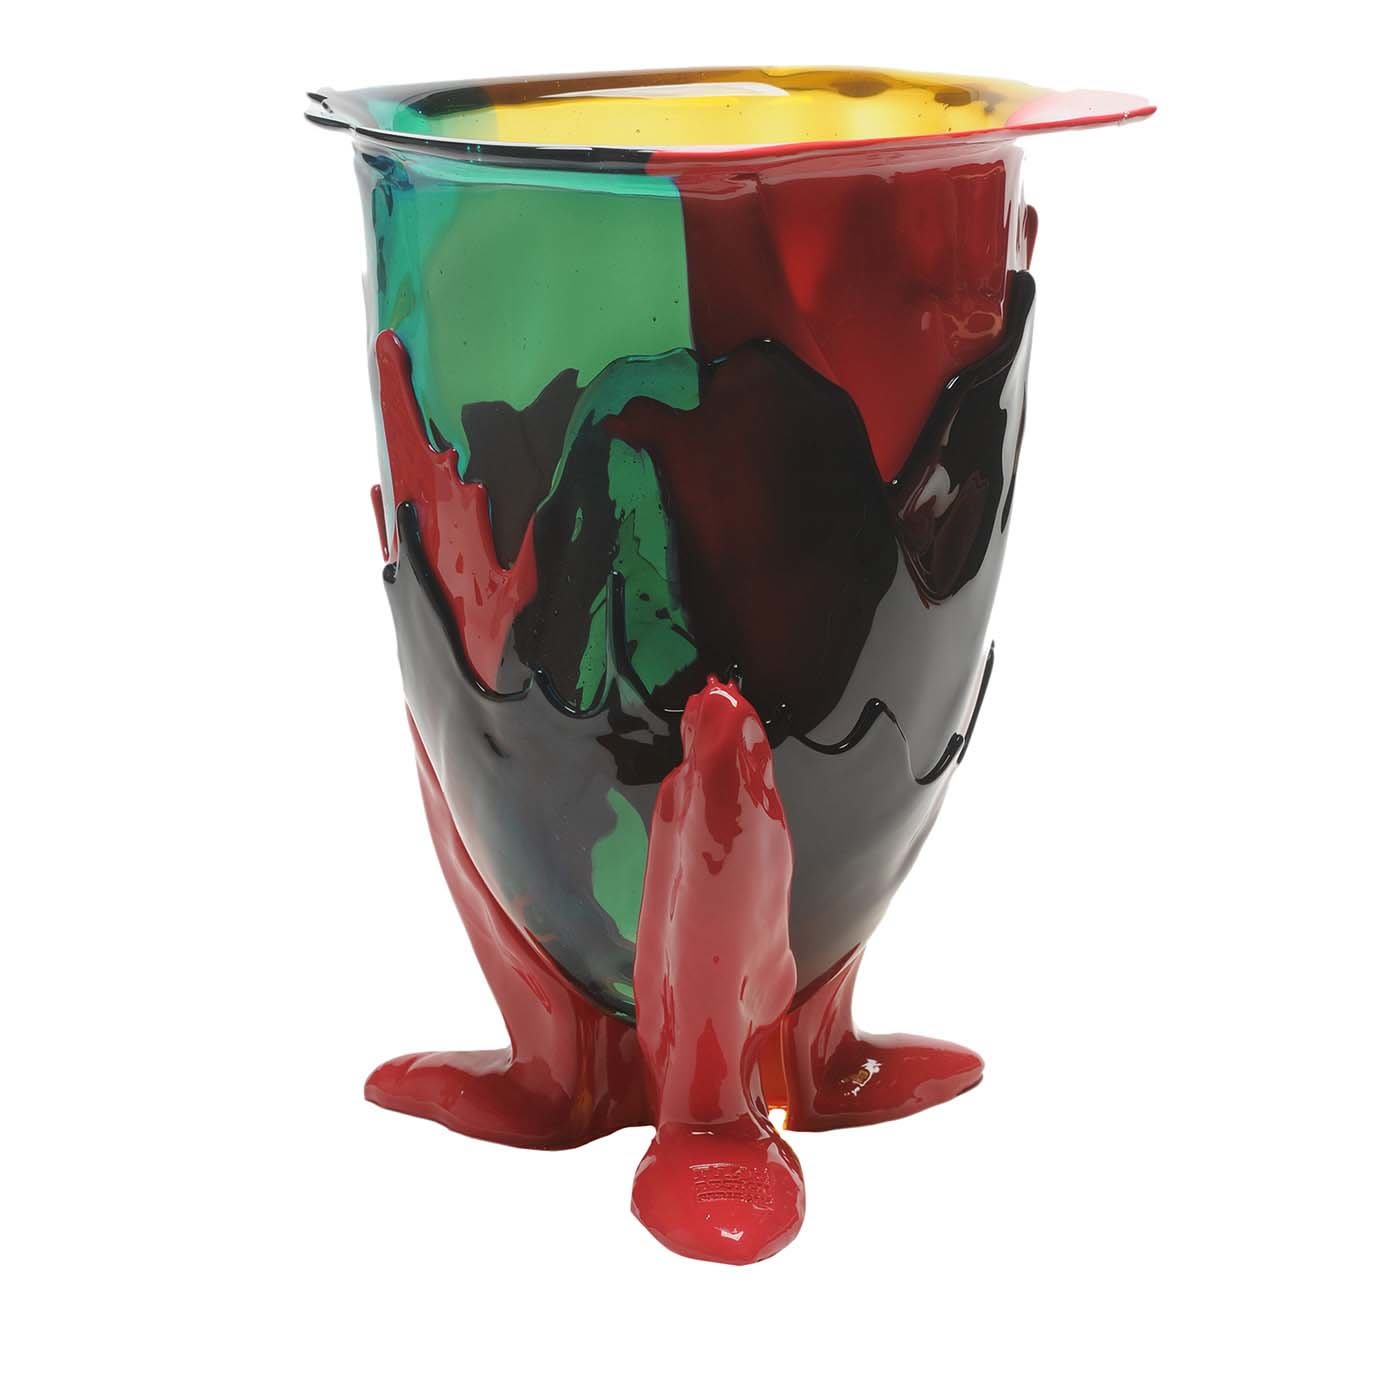 Amazonia Green and Red Large Vase by Gaetano Pesce - Corsi Design Factory